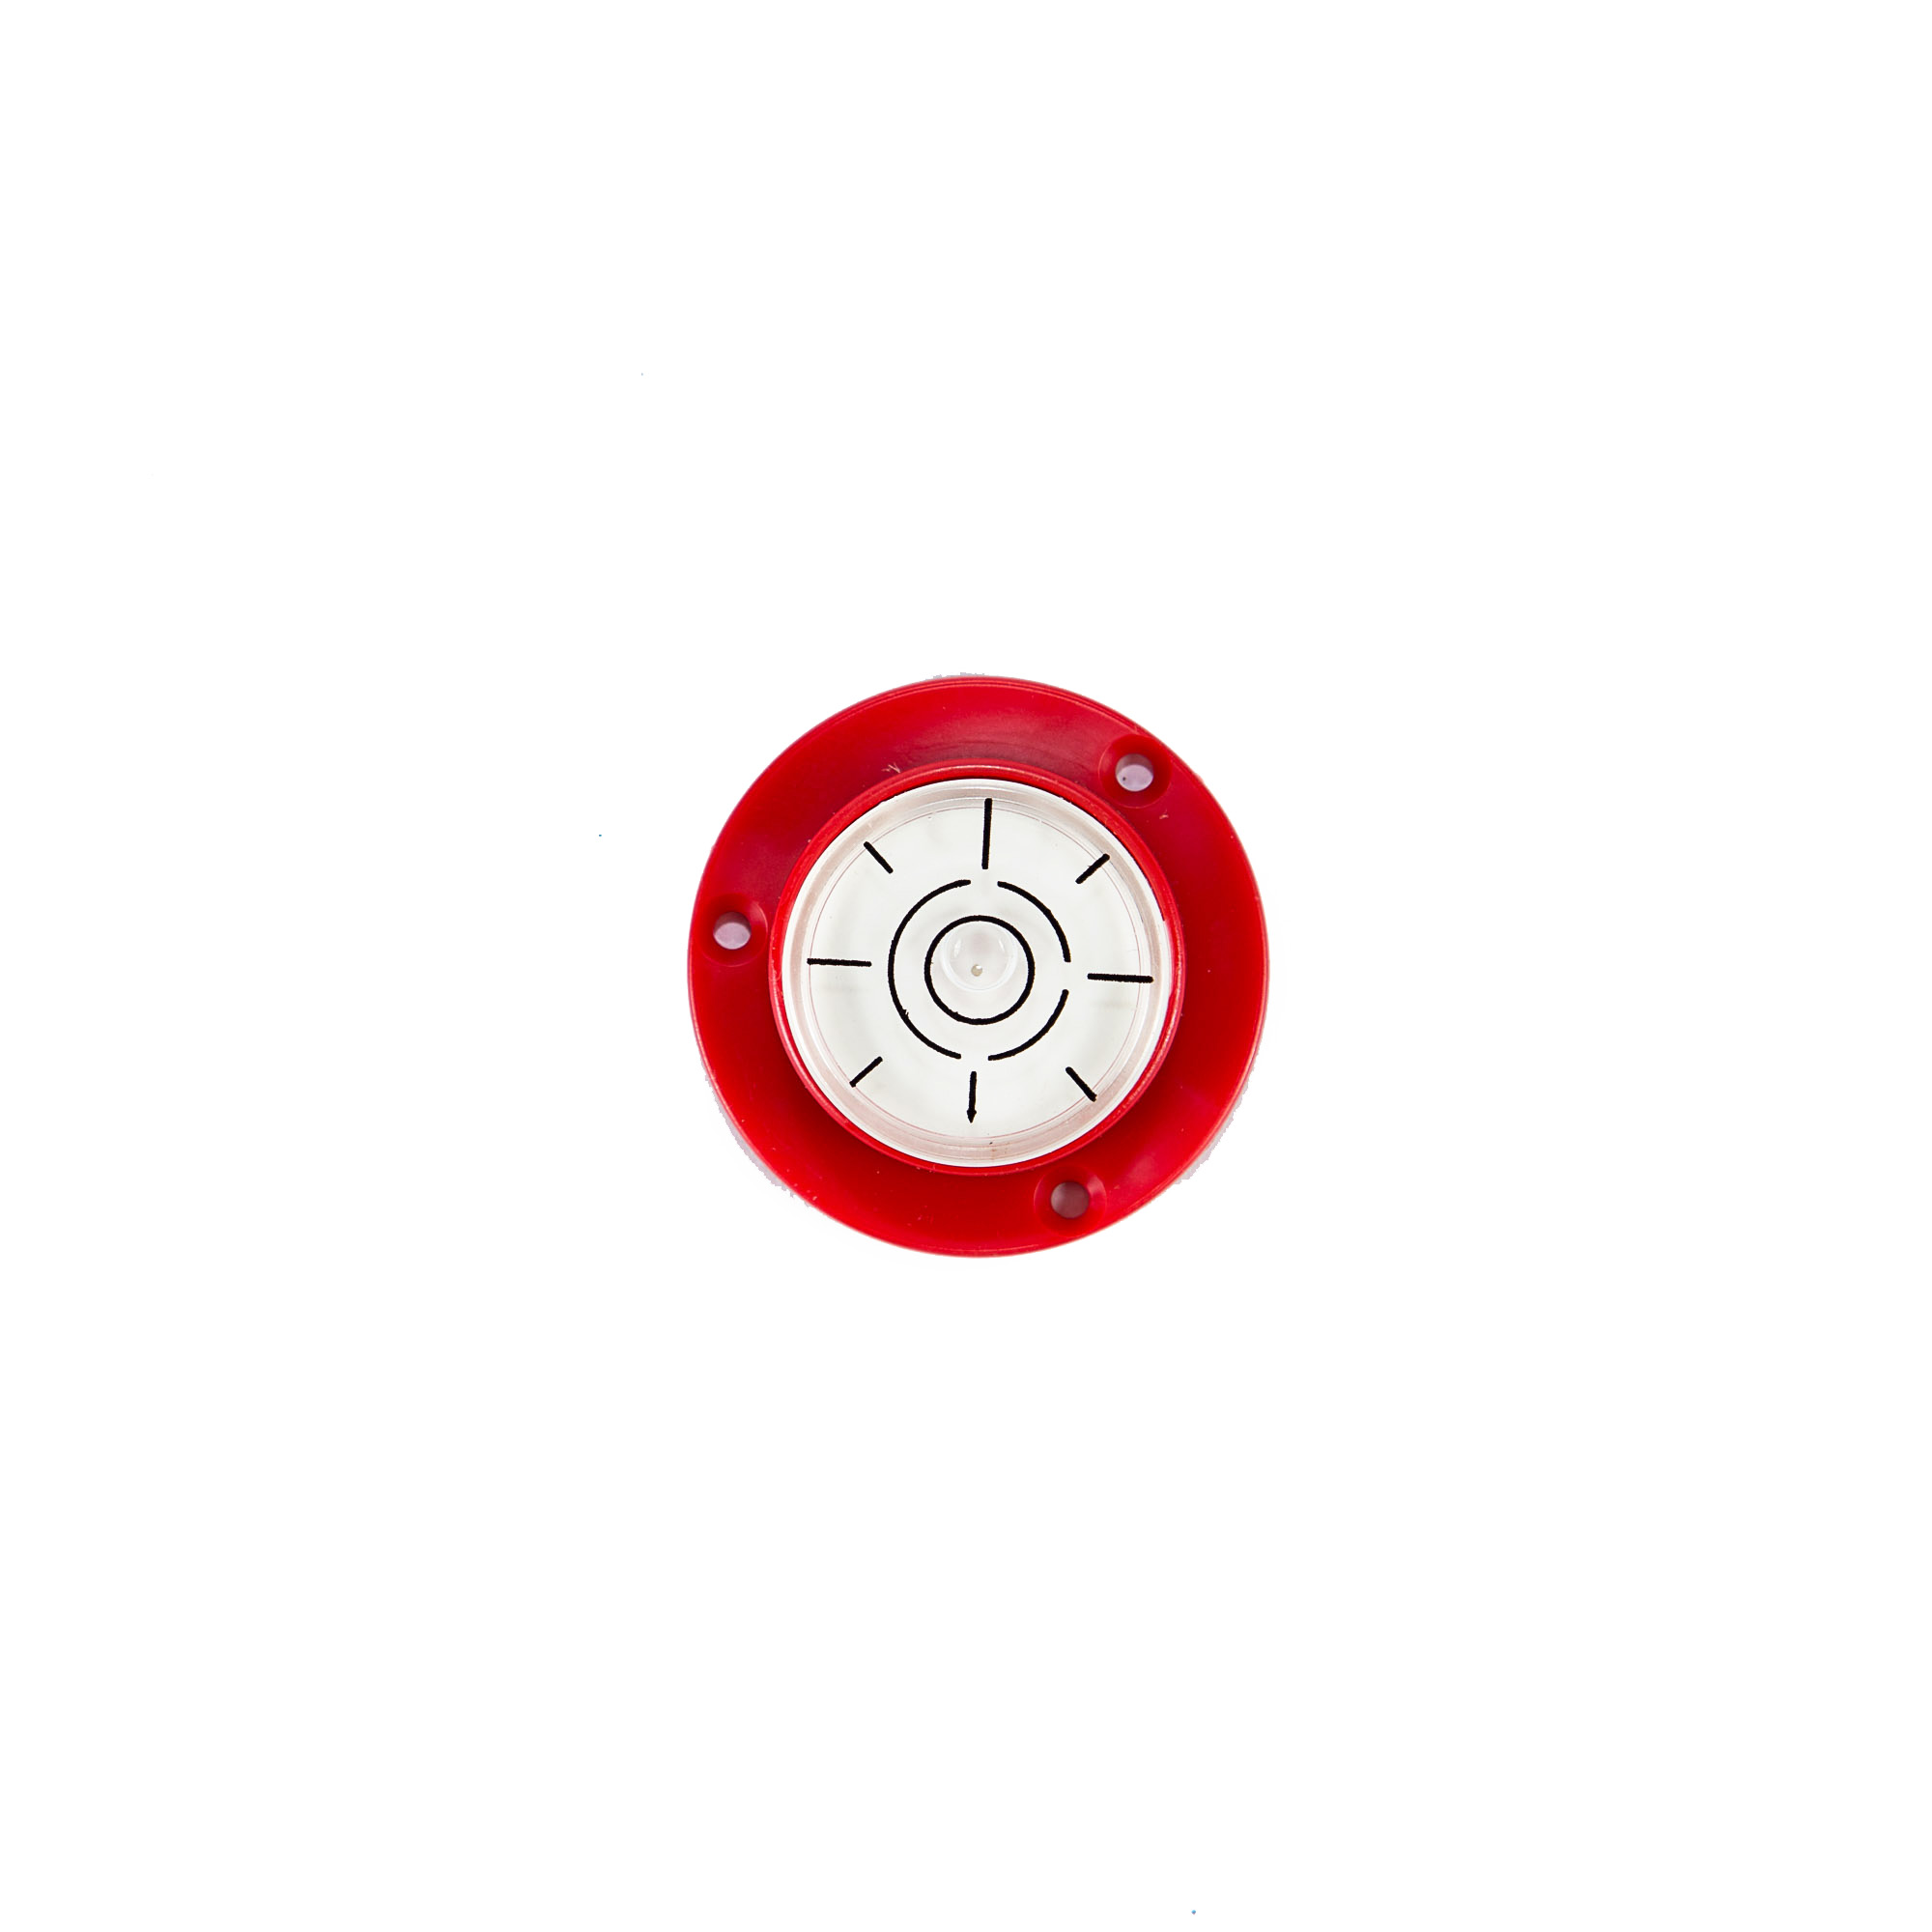 Swanson SL0002 Red Round Surface Level with Spirit Bubble and Fastening Holes (Assembled 2 inches) - image 1 of 6